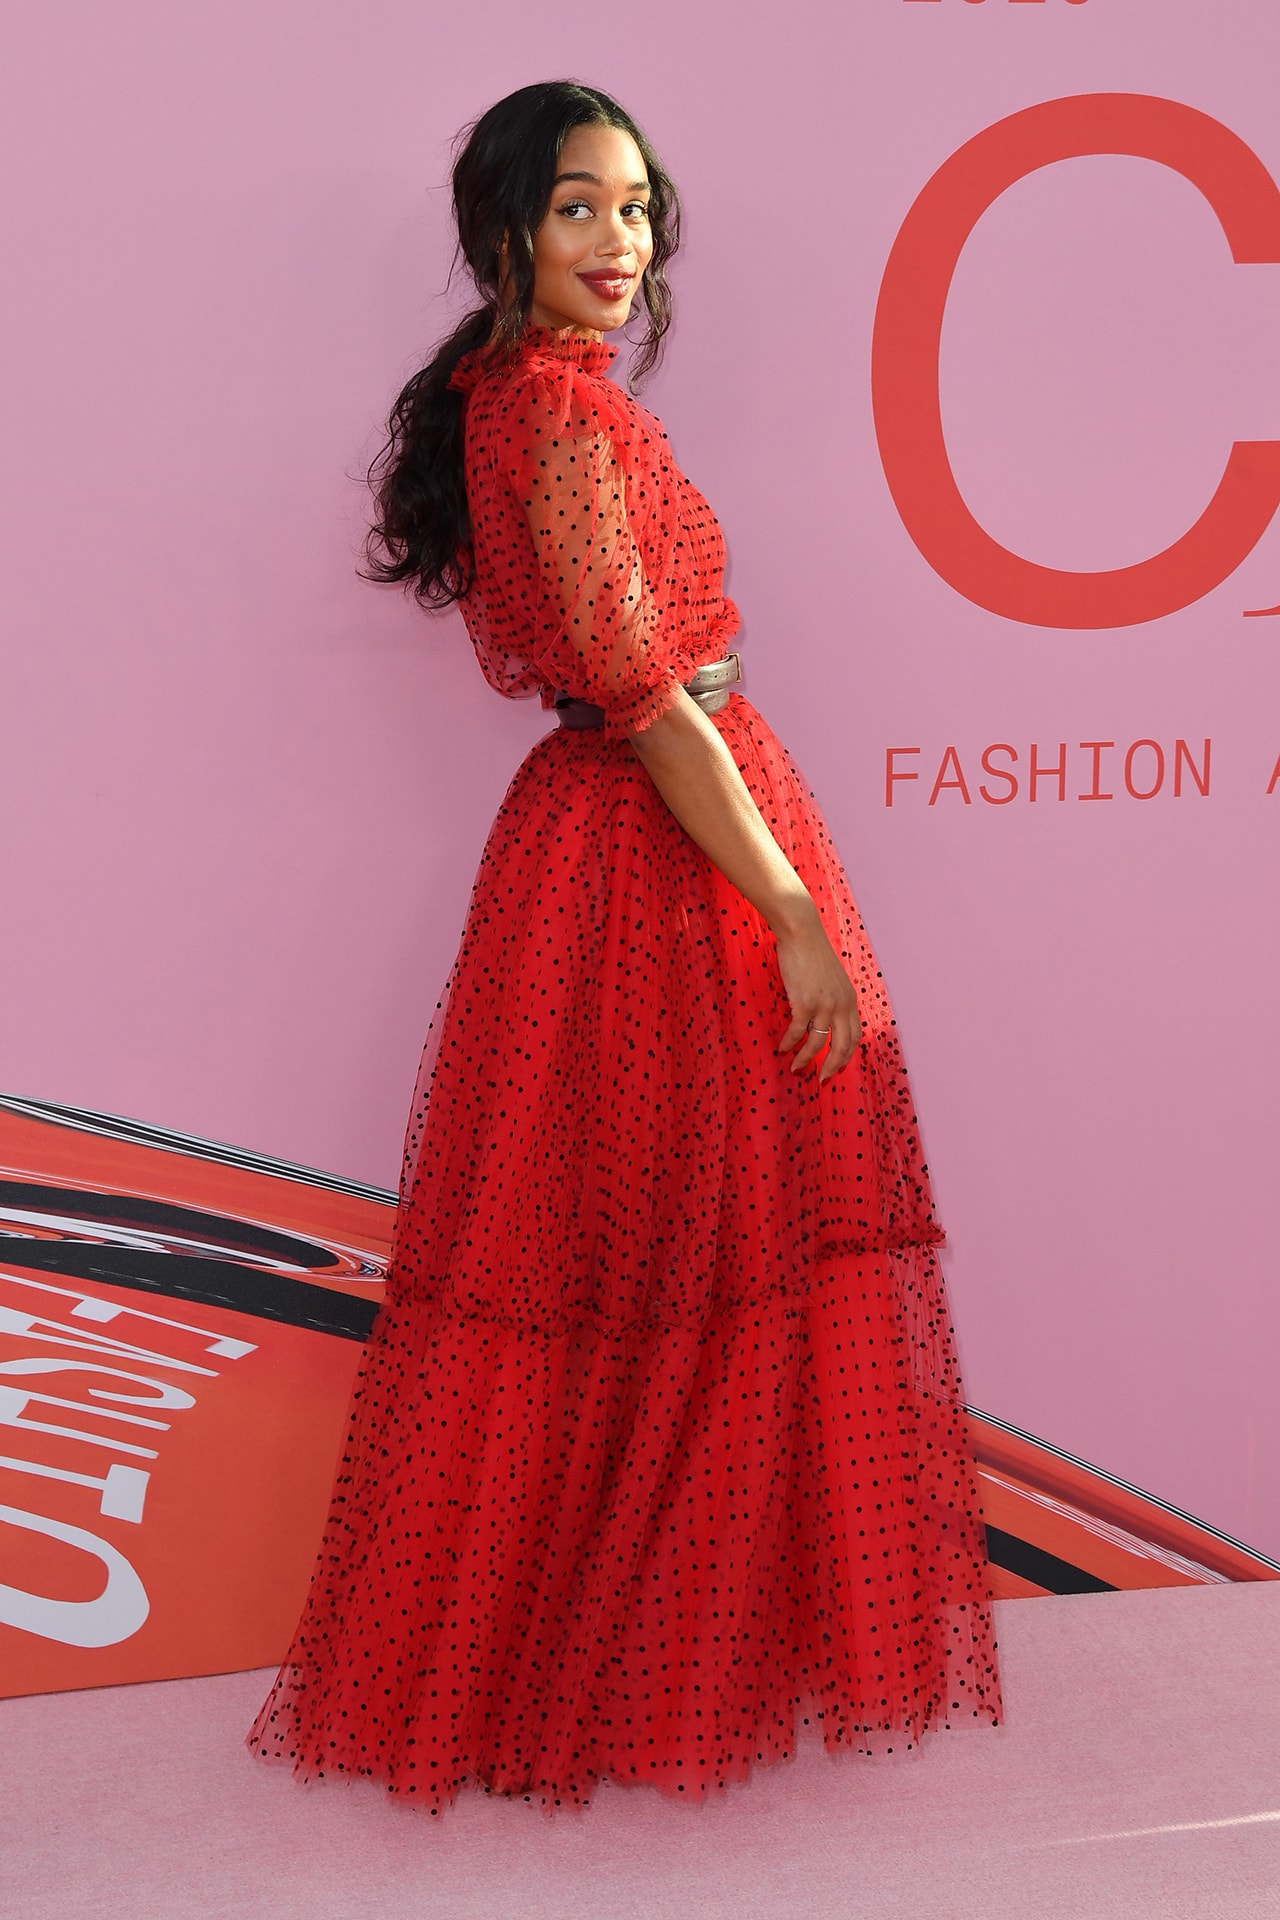 CFDA Fashion Awards 2019 Red Carpet Laura Harrier Red Dress